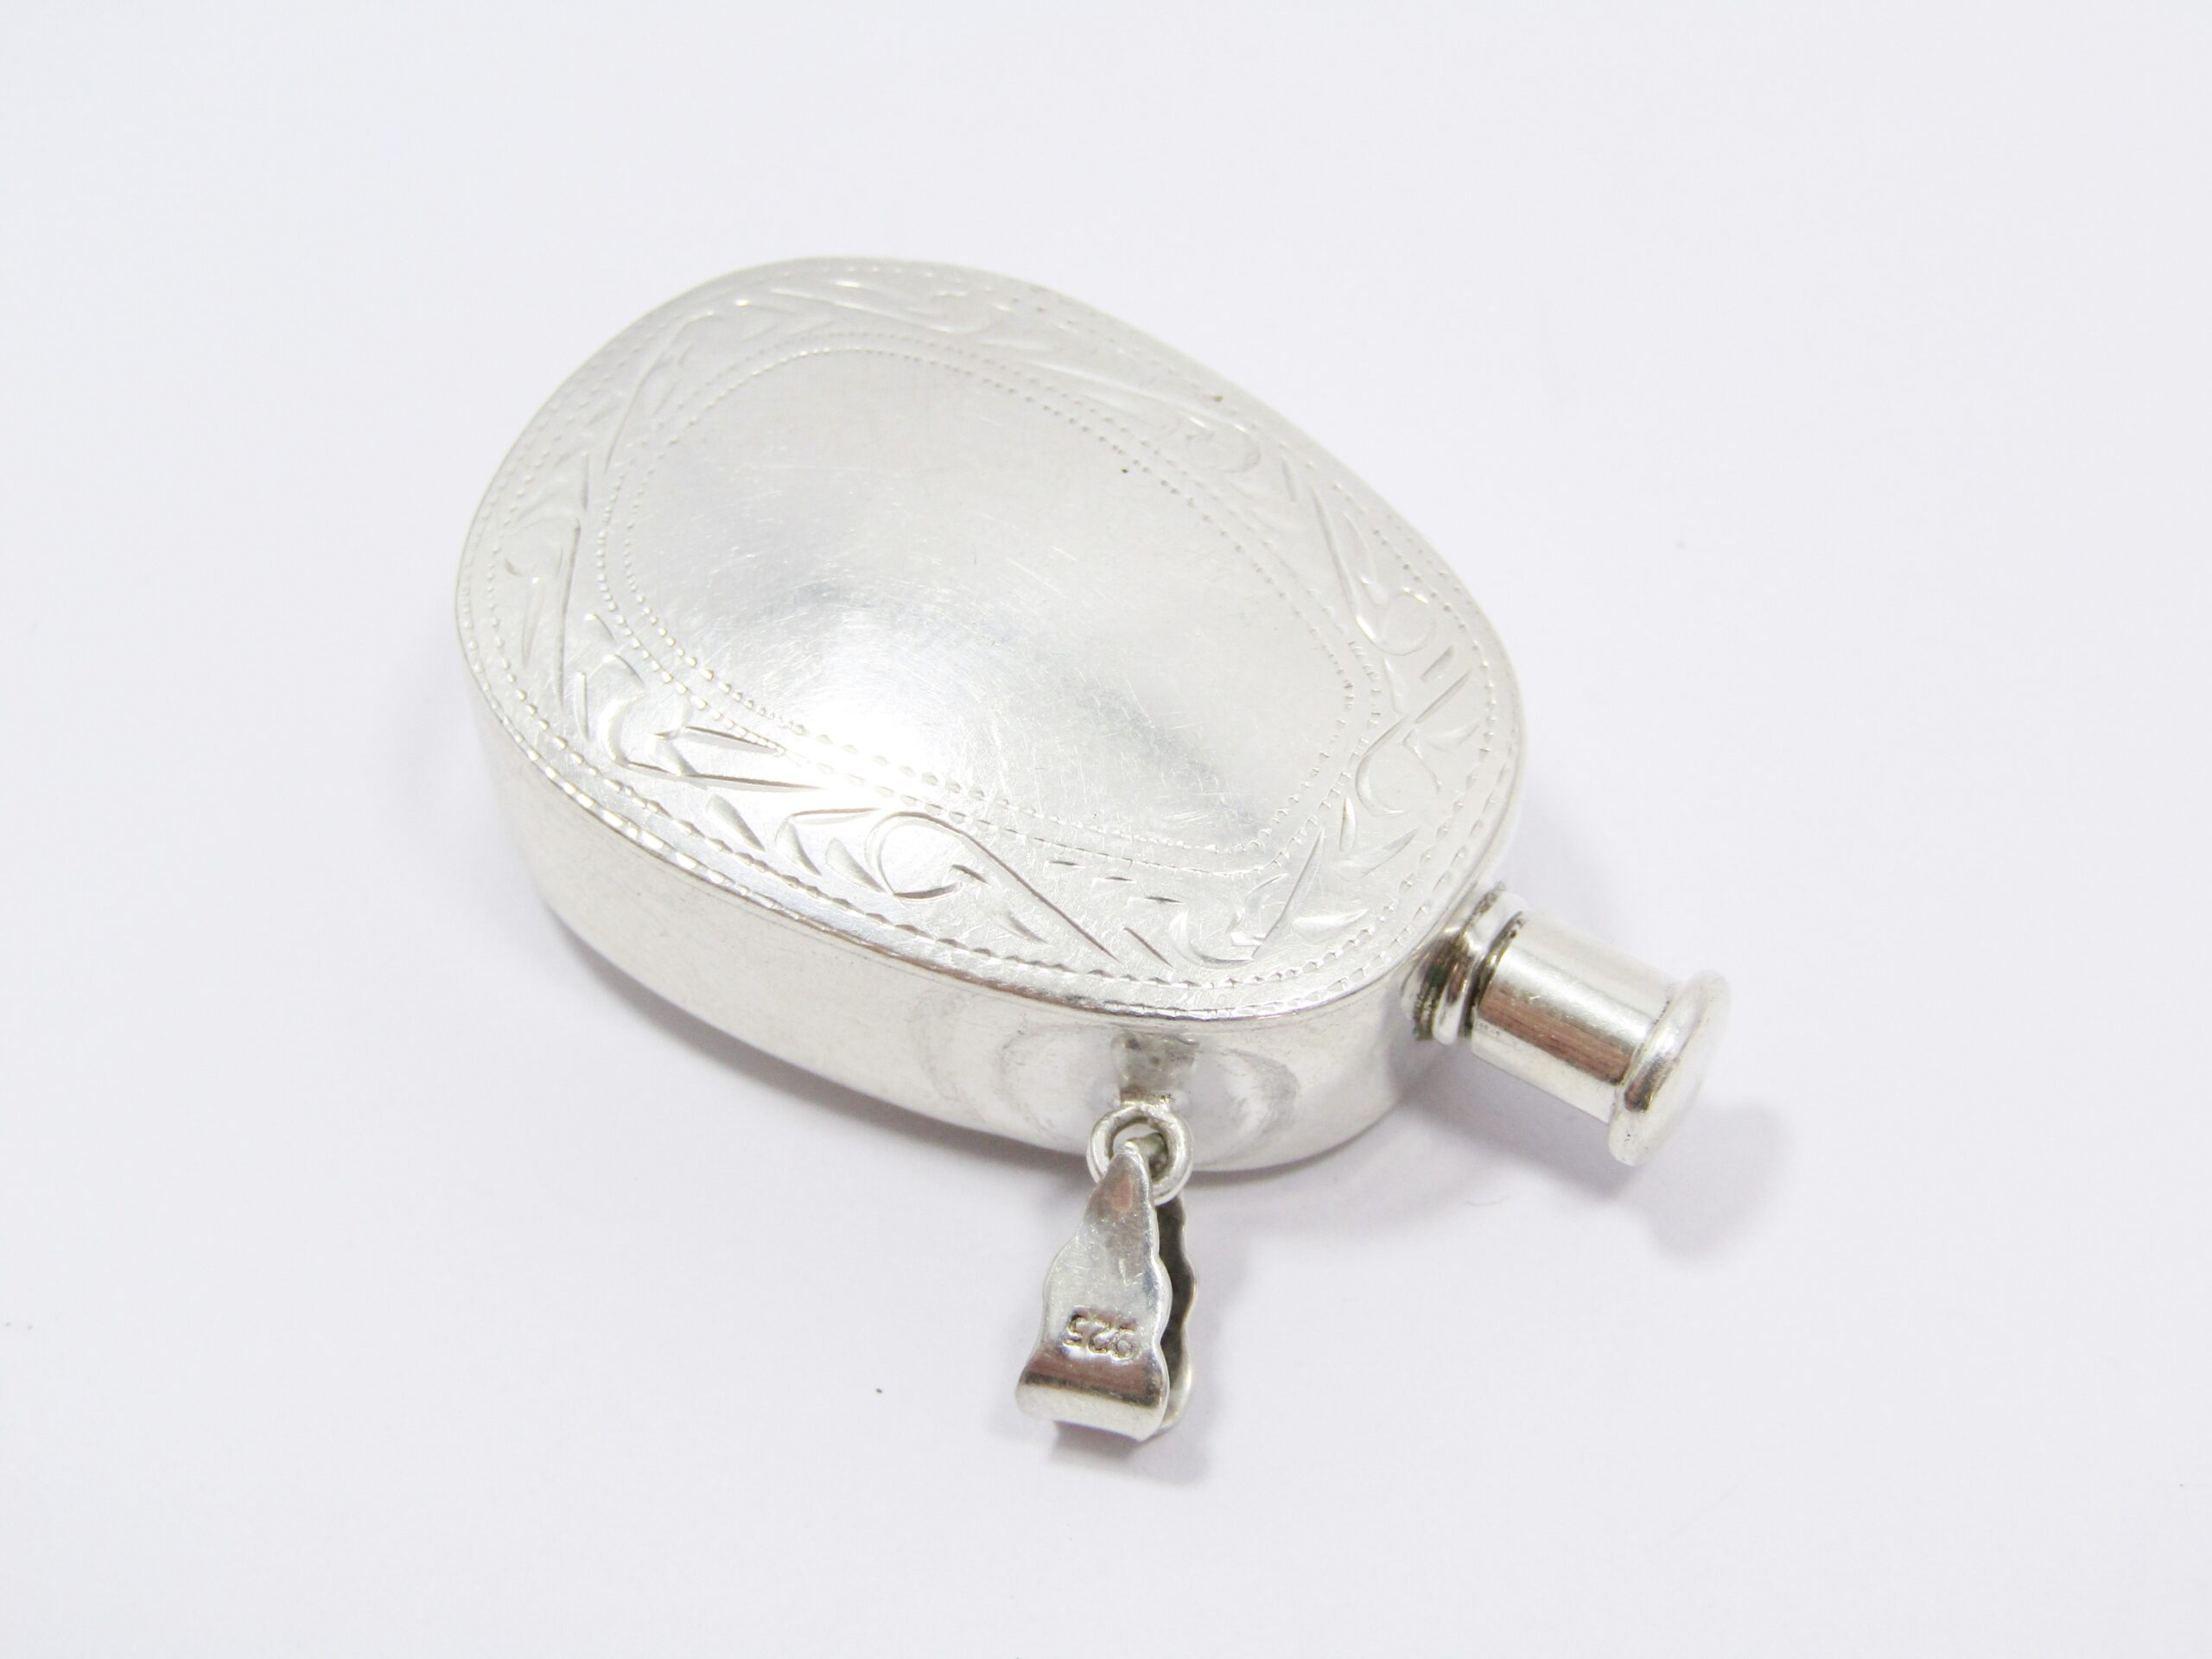 A Gorgeous Large Engraved Perfume Bottle Pendant in Sterling Silver